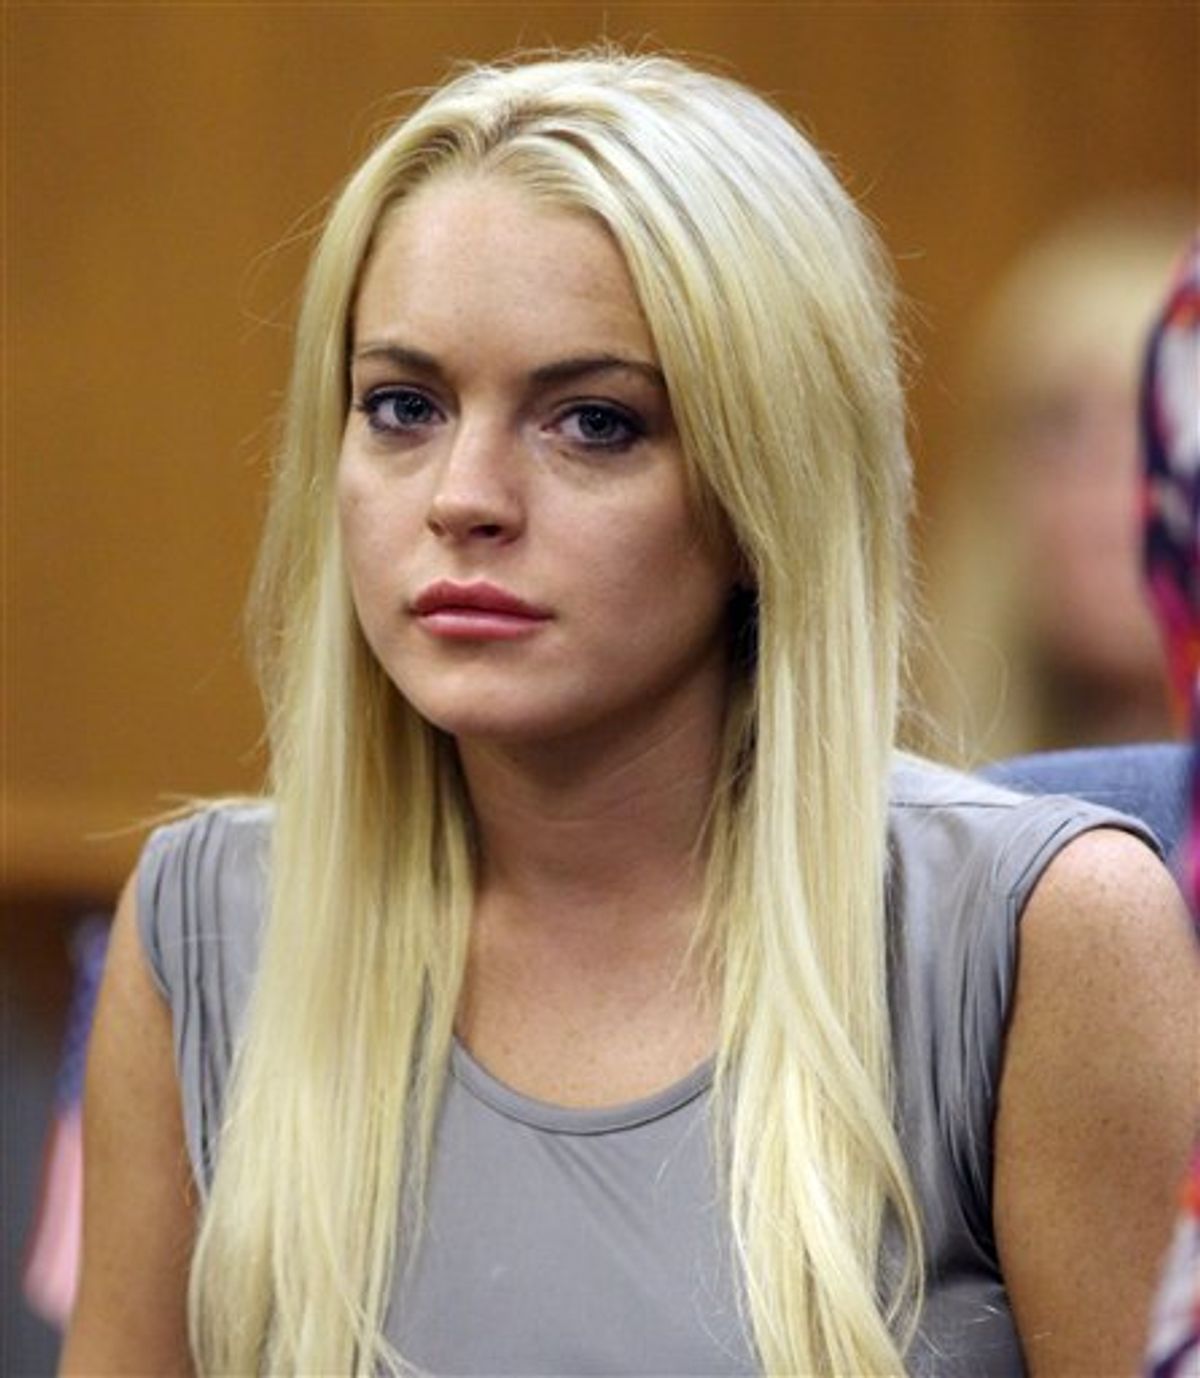 FILE - In this July 20, 2010 file photo, Lindsay Lohan is shown in court in Beverly Hills, Calif., where she was taken into custody to serve a jail sentence for probation violation. (AP Photo/Al Seib, file) (AP)